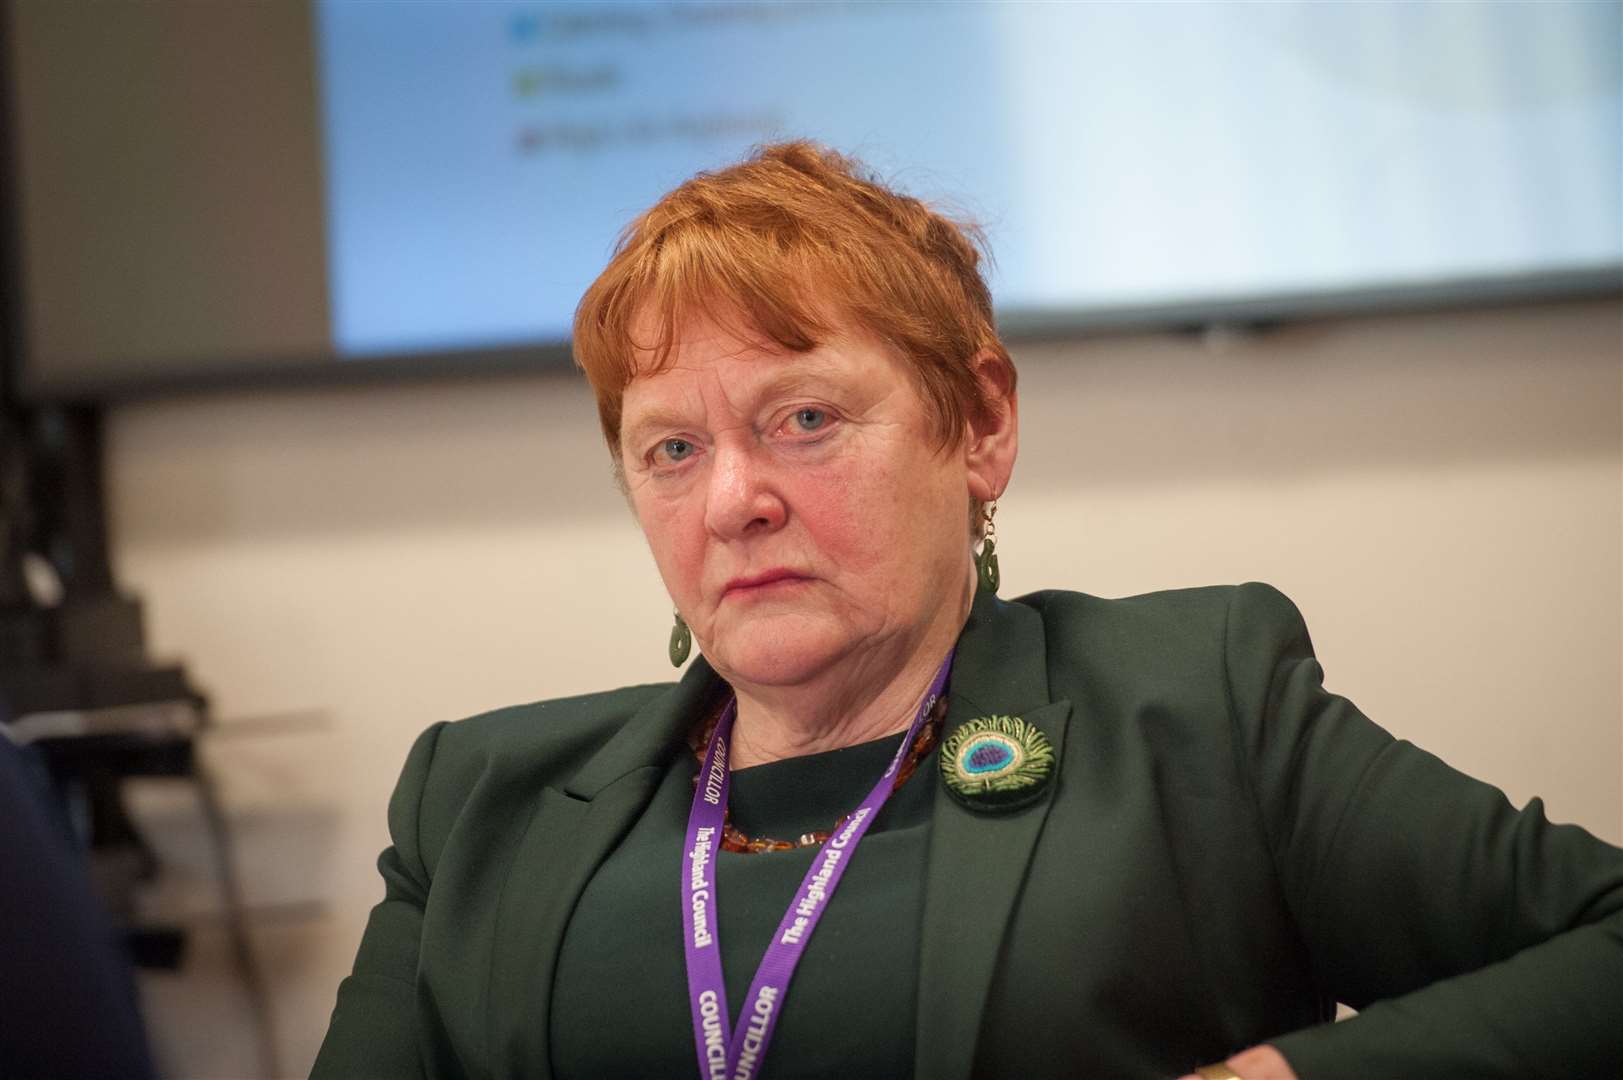 Council leader Margaret Davidson says the grant will relieve some of the stress and financial concerns for people who are asked to self-isolate.